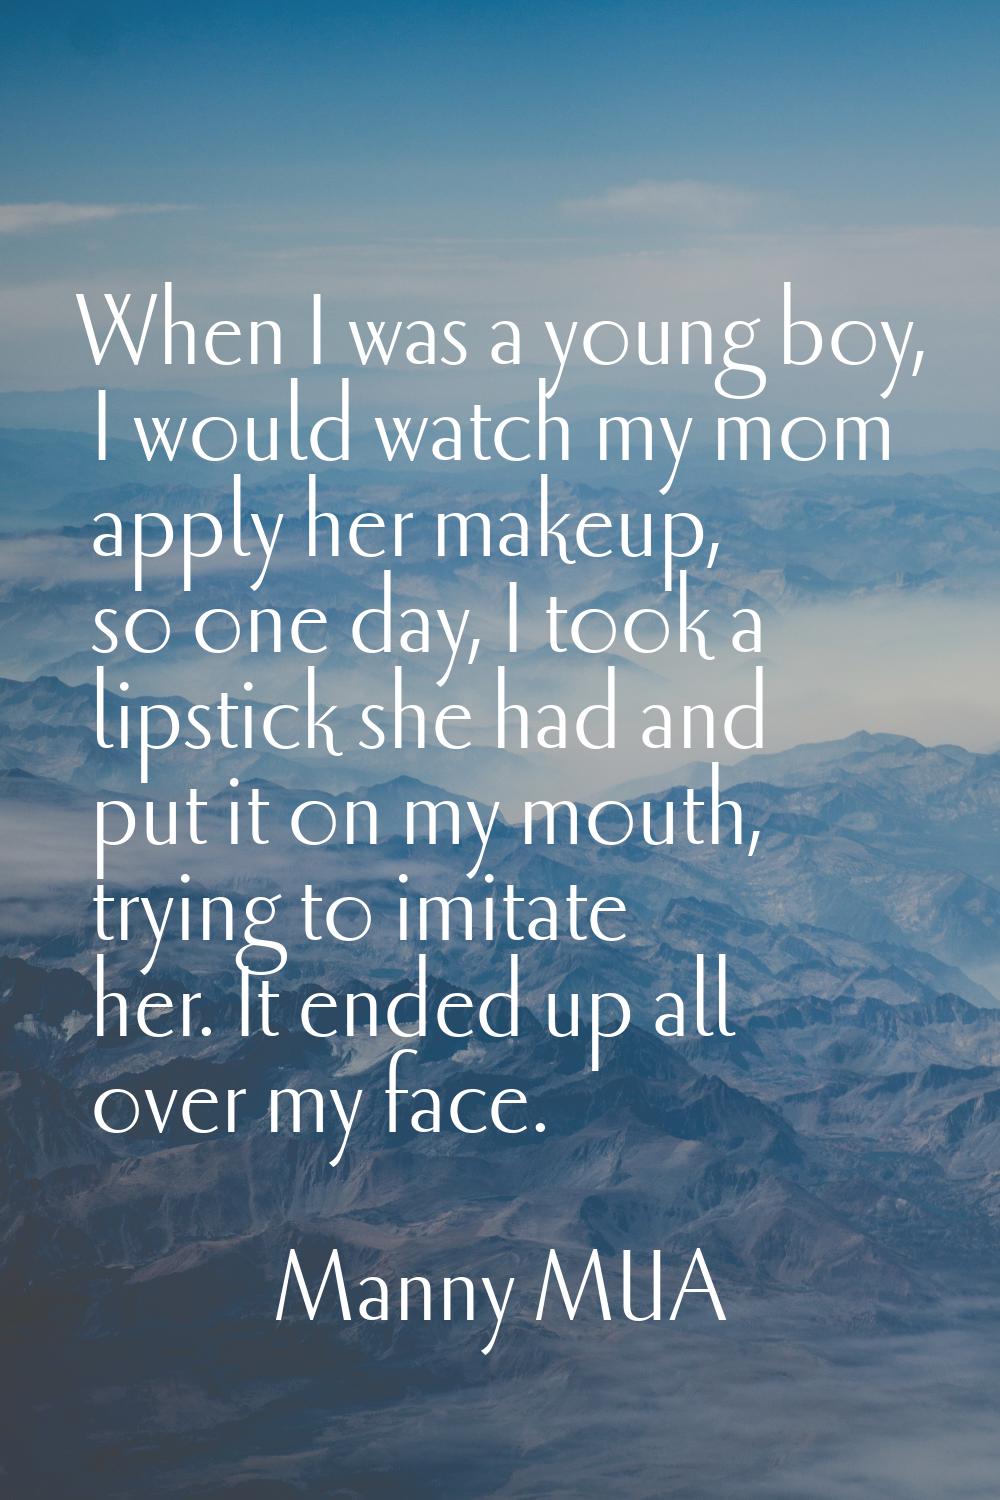 When I was a young boy, I would watch my mom apply her makeup, so one day, I took a lipstick she ha